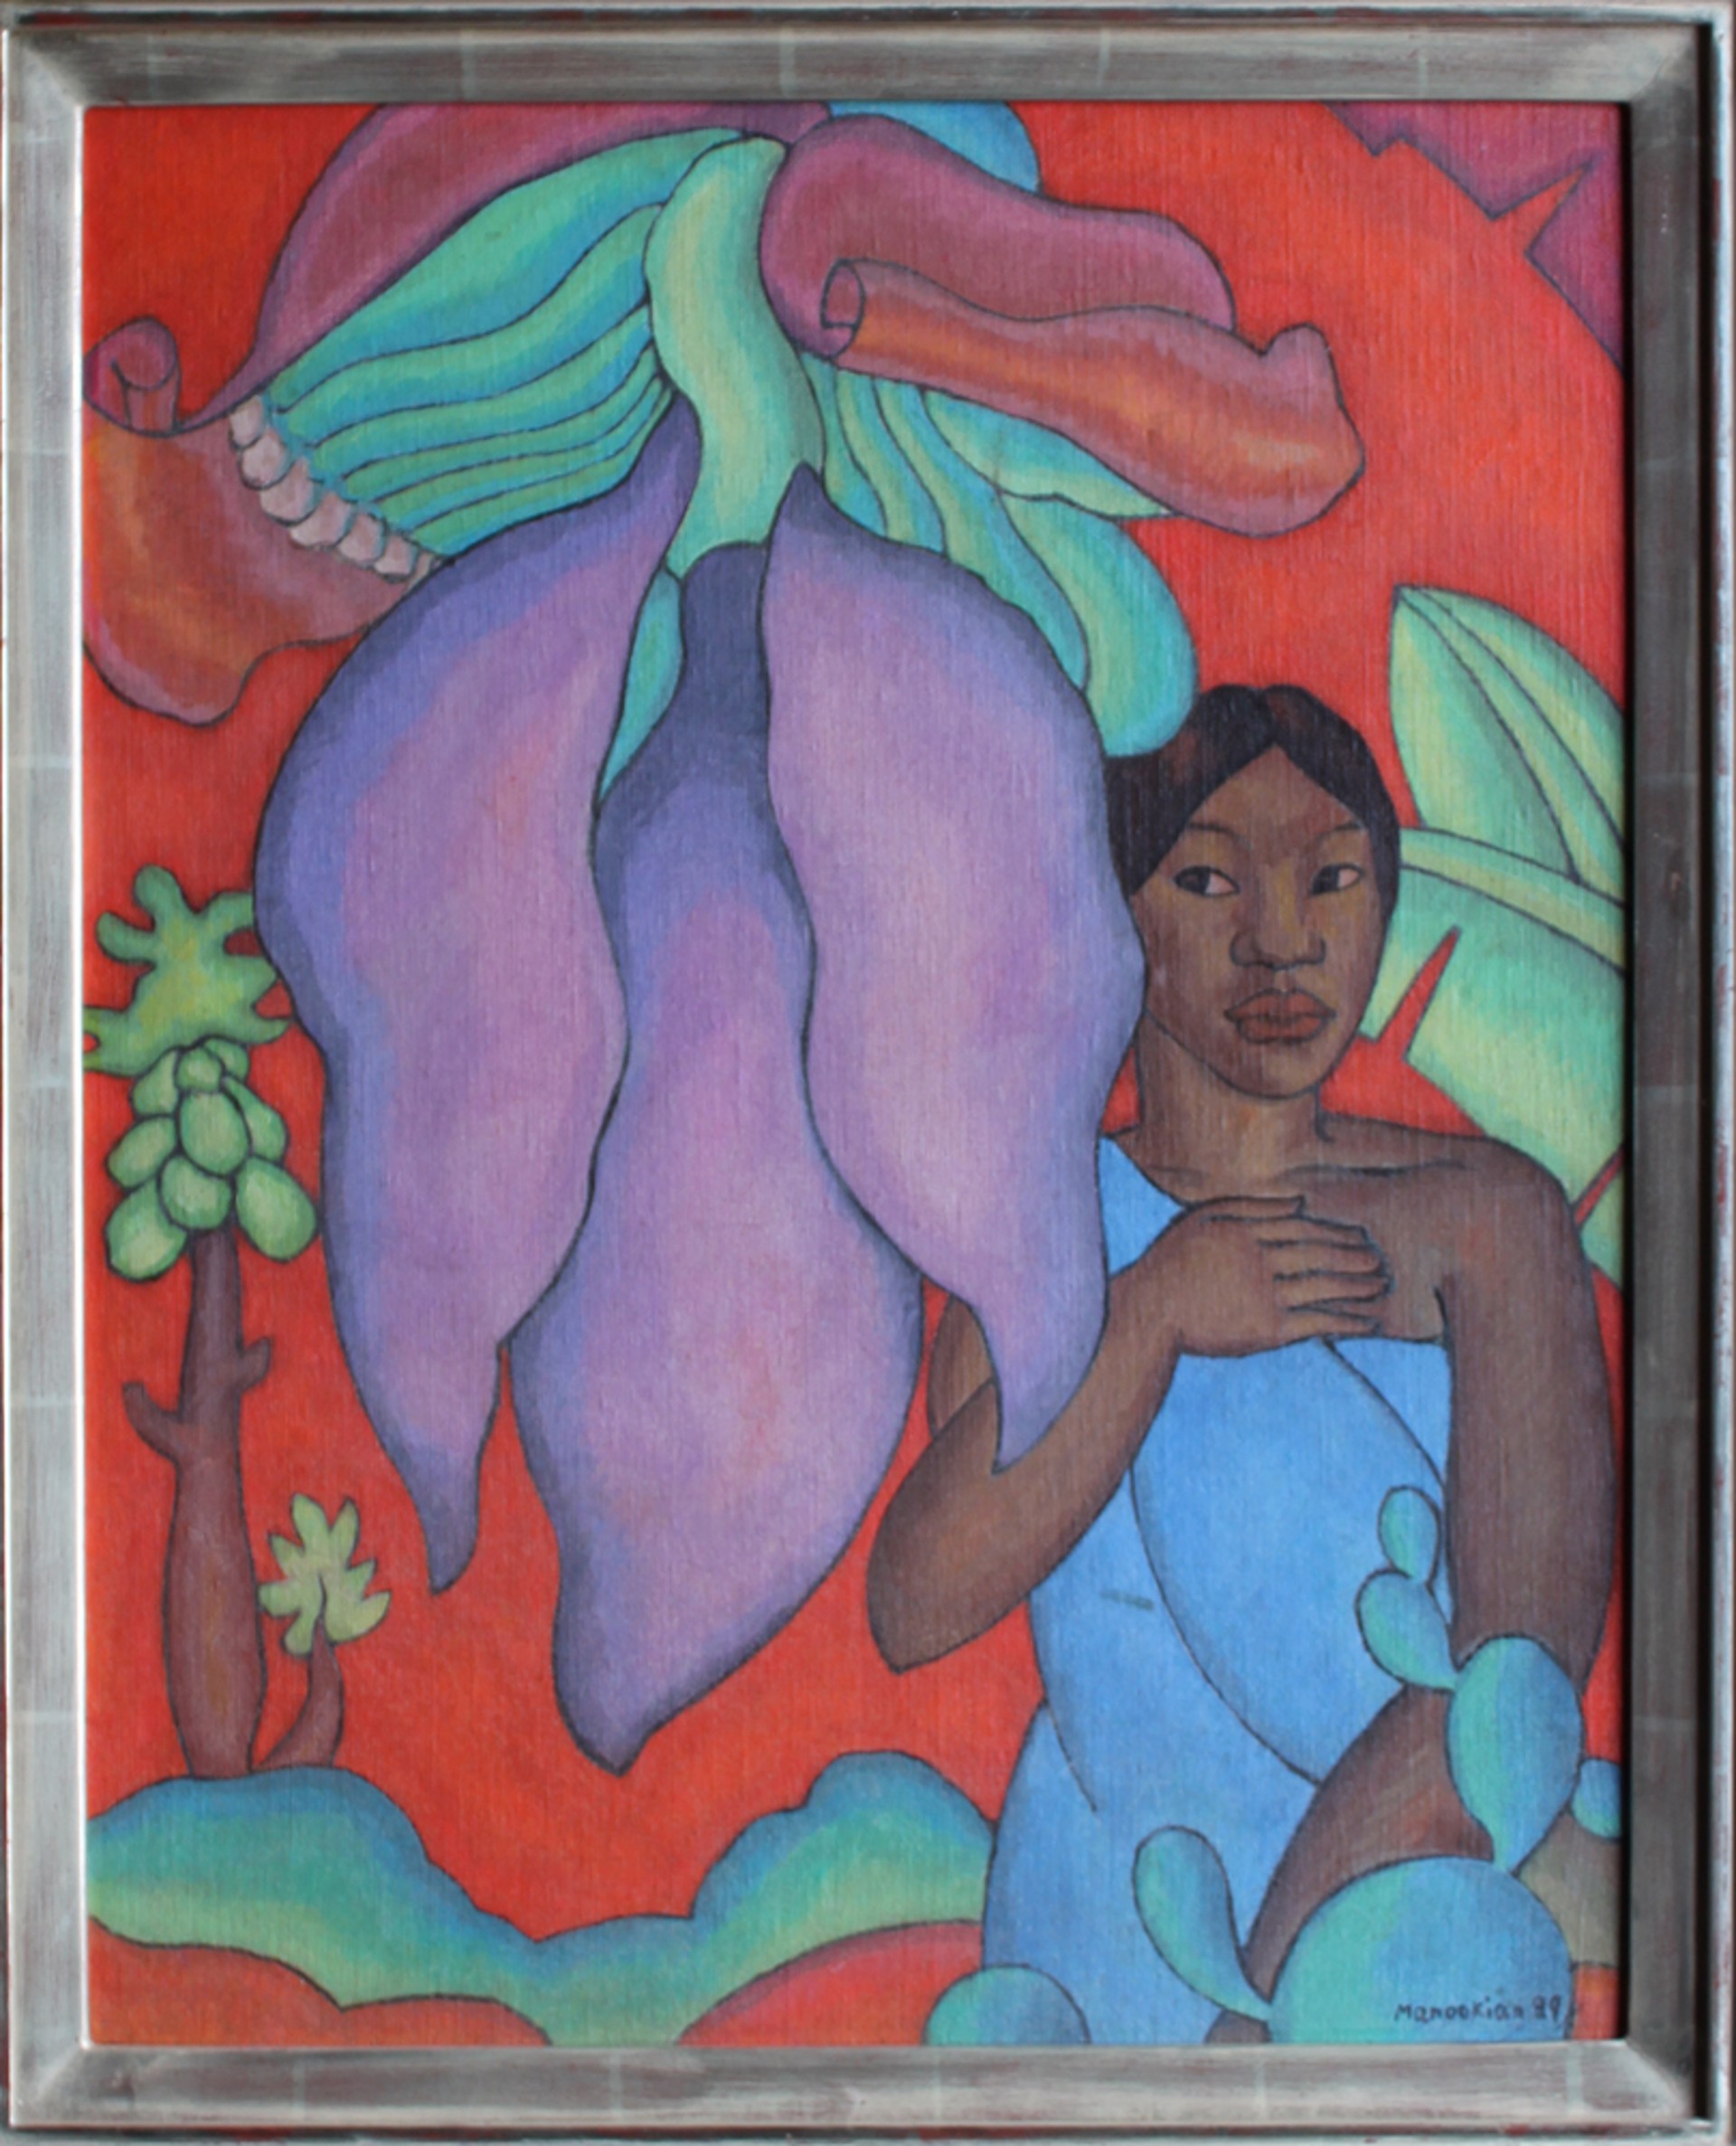 Untitled, Girl with Banana Leaf by Arman T. Manookian